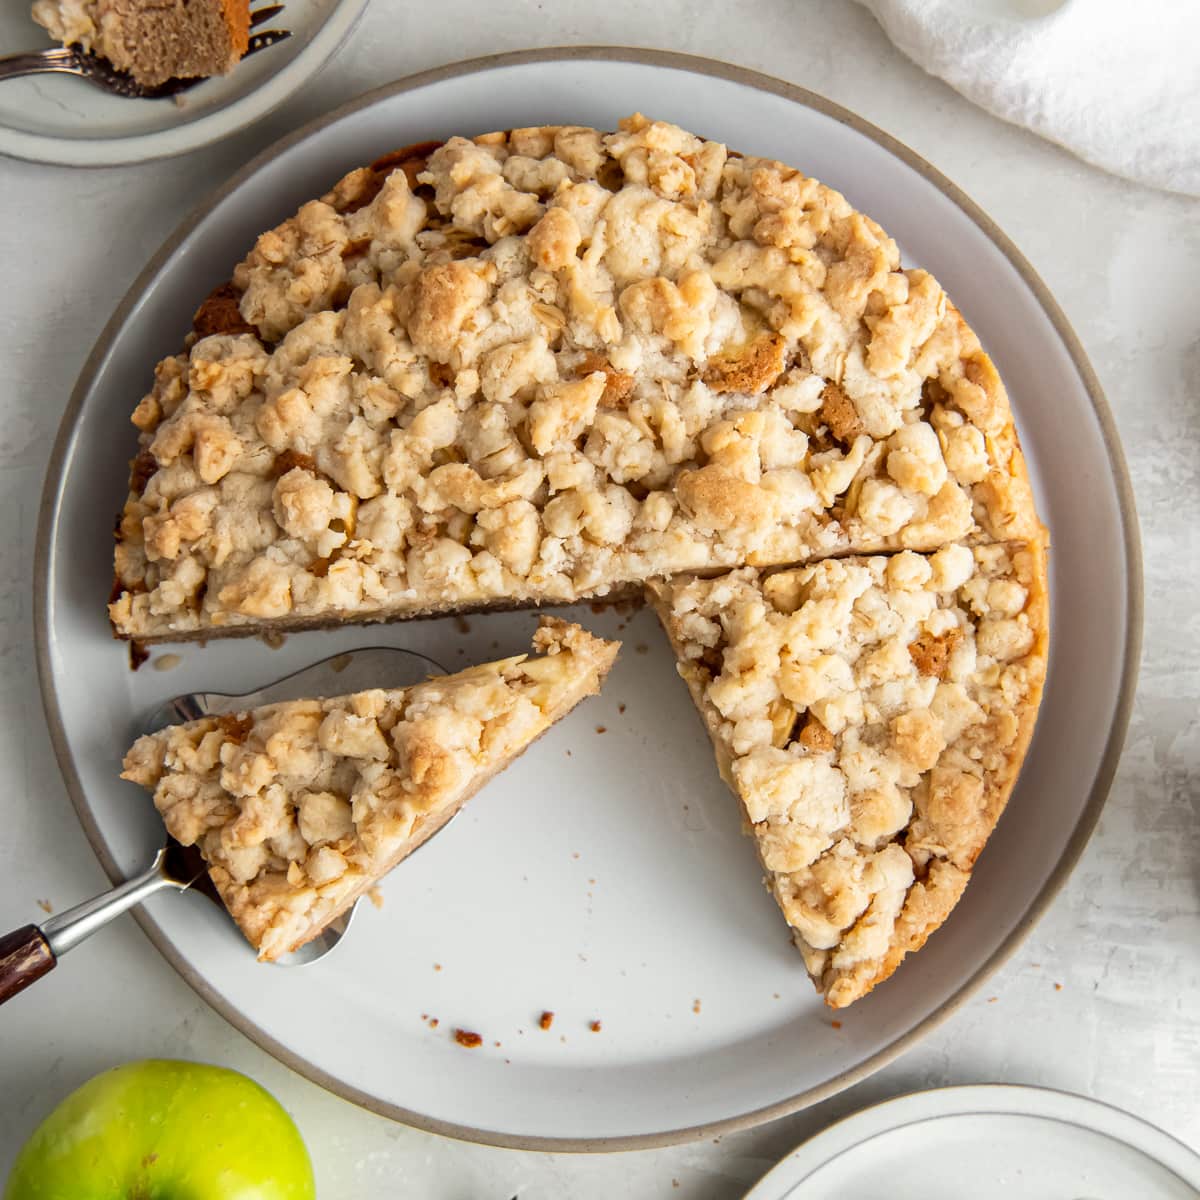 Irish apple cake with crumble topping on a plate with cake server holding a slice.